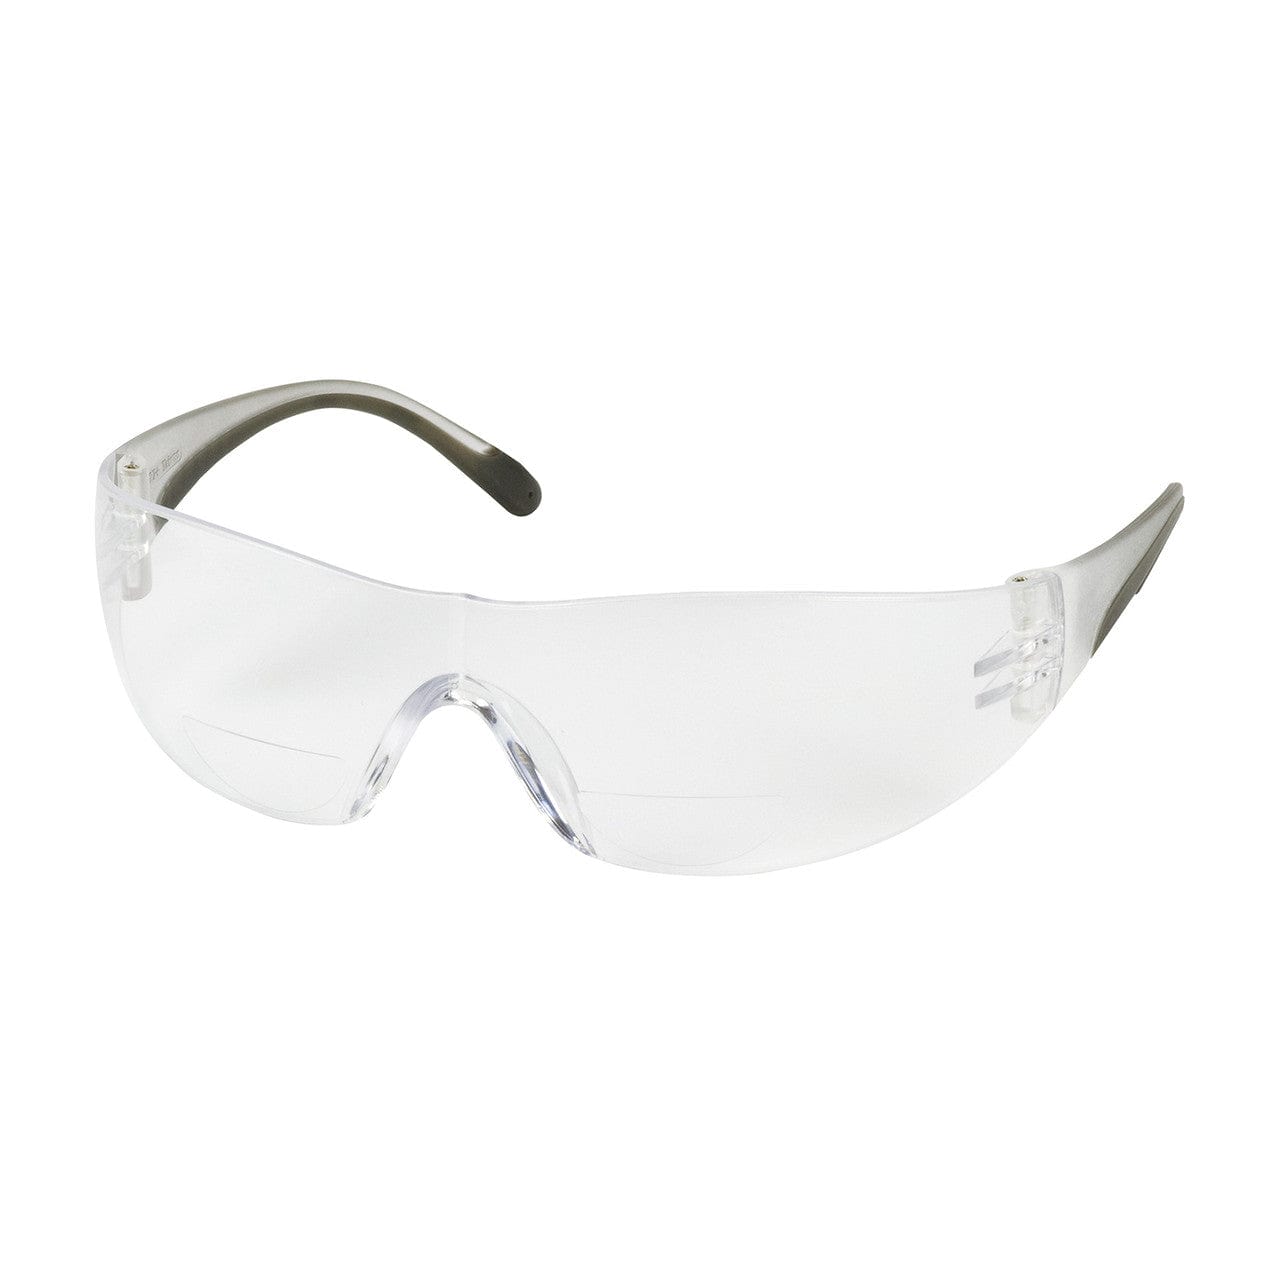 Bouton Zenon Z12R Bifocal Safety Glasses with Black Temple Trim and Clear Lens Front View